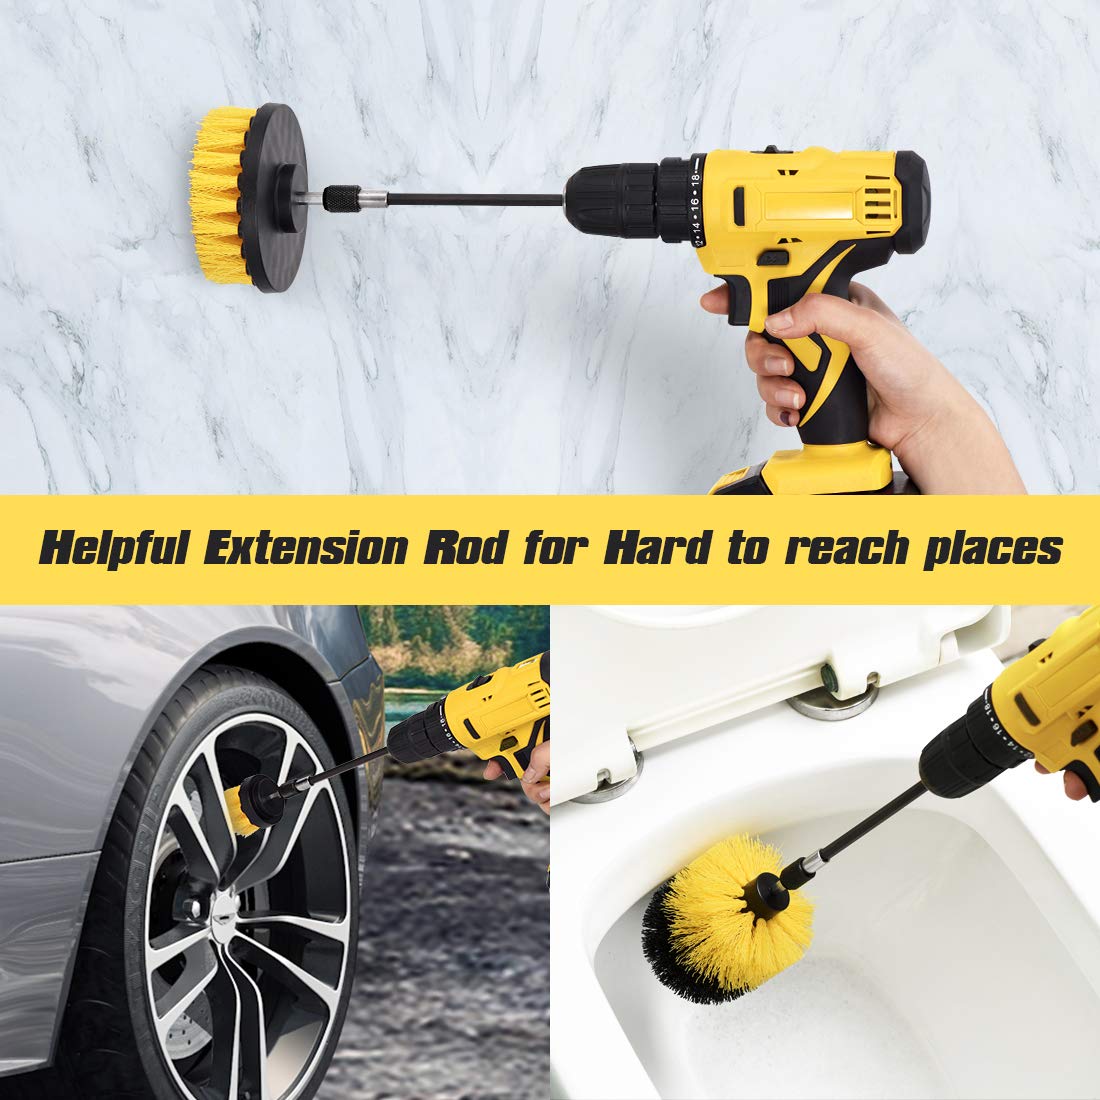 Shieldpro Drill Brush Attachment Set,Power Cleaning Scrub Brush,All Purpose Drill Brushes with Extend Long Attachment for Bathroom and Kitchen Surface,Grout,Tub,Shower,Tile,Corners, Automotive-Yellow